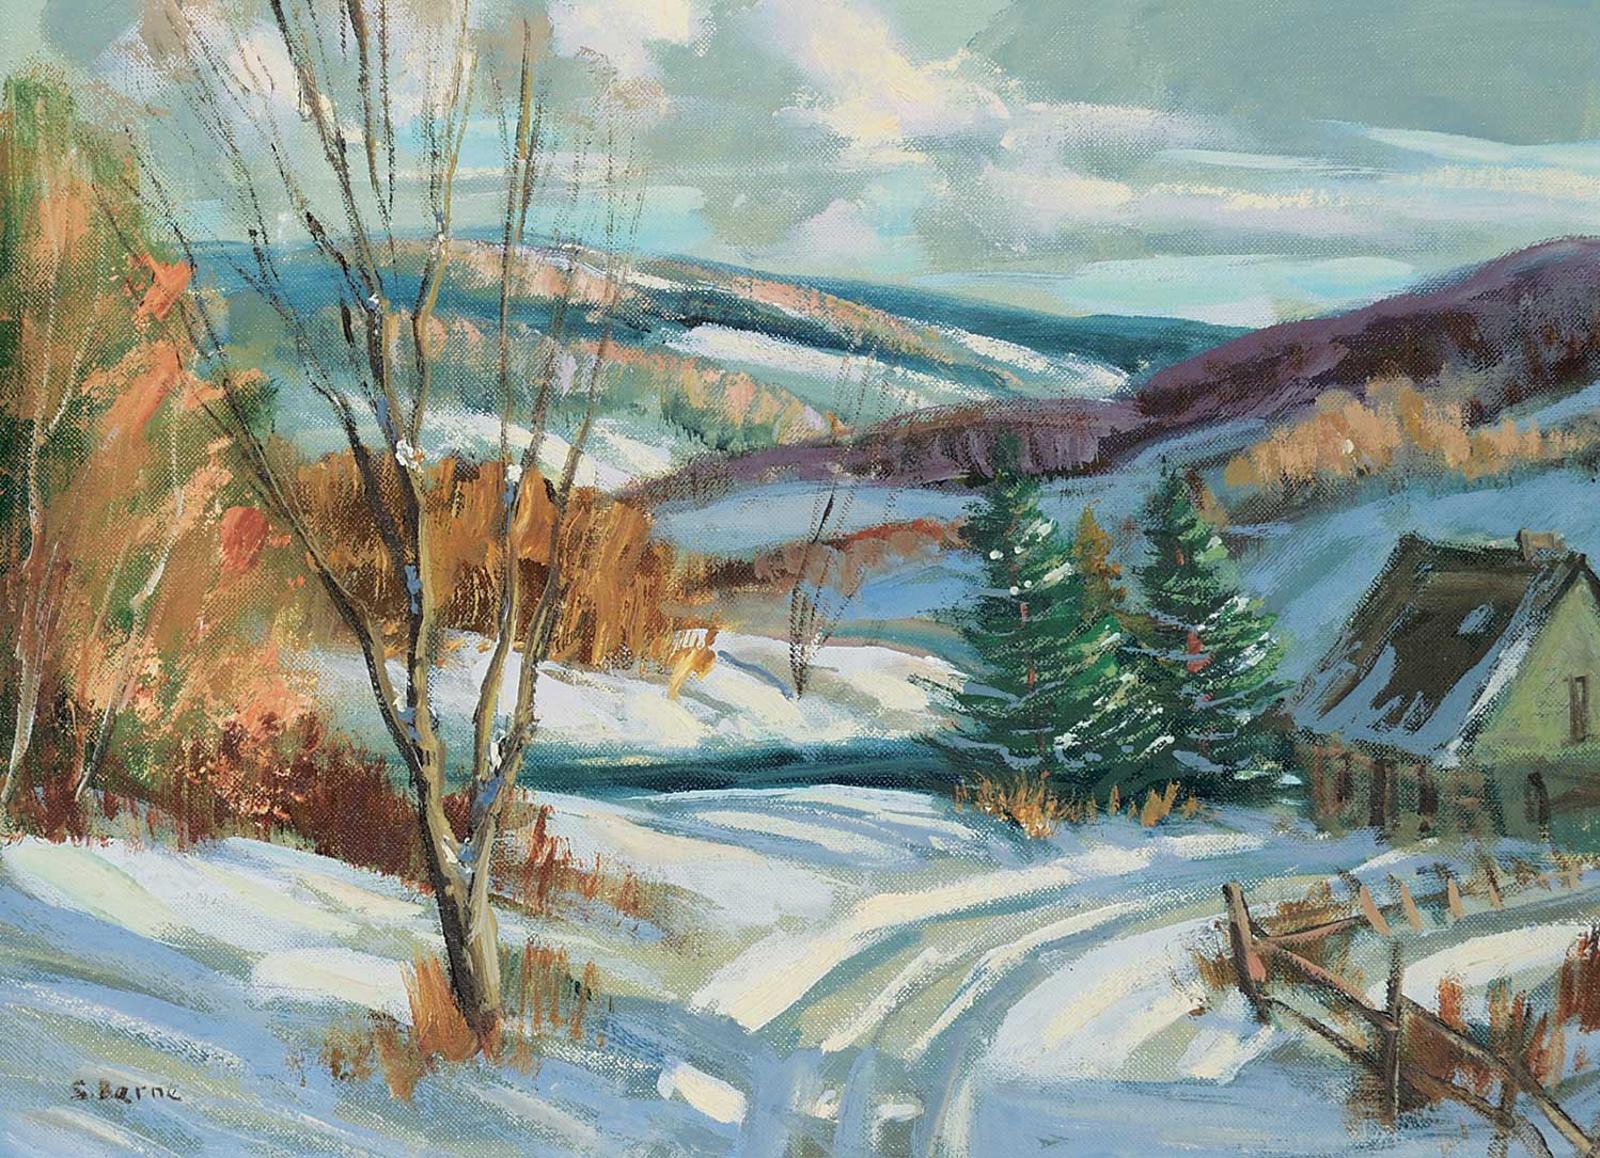 Sydney Martin Berne (1921-2013) - Untitled - Road to the Farm in Winter